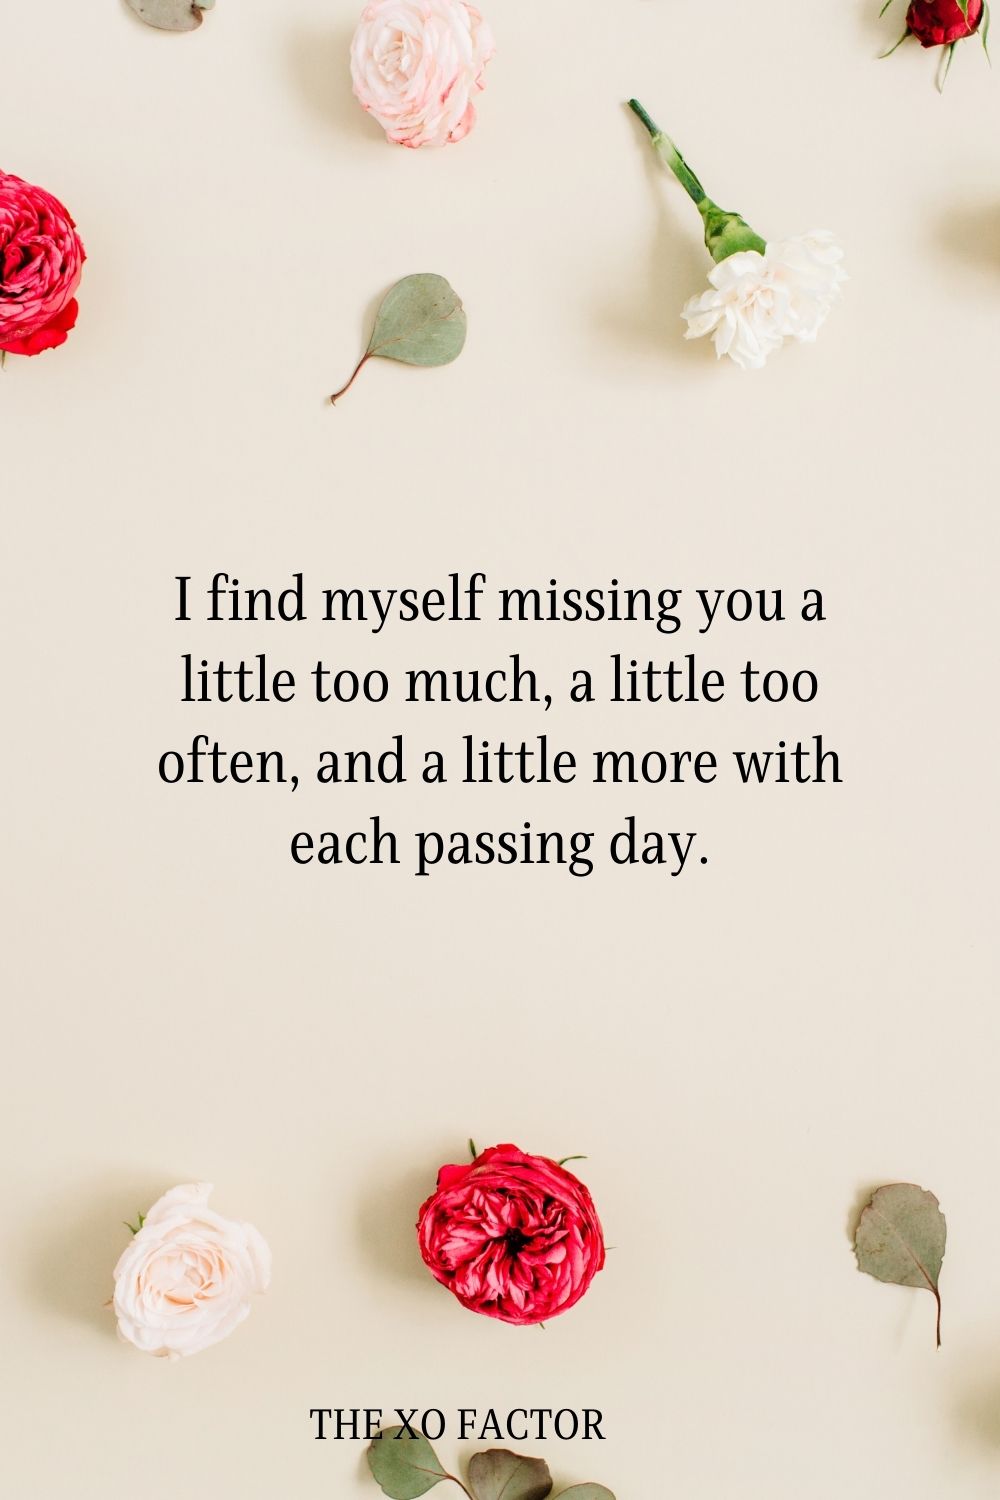 I find myself missing you a little too much, a little too often, and a little more with each passing day.